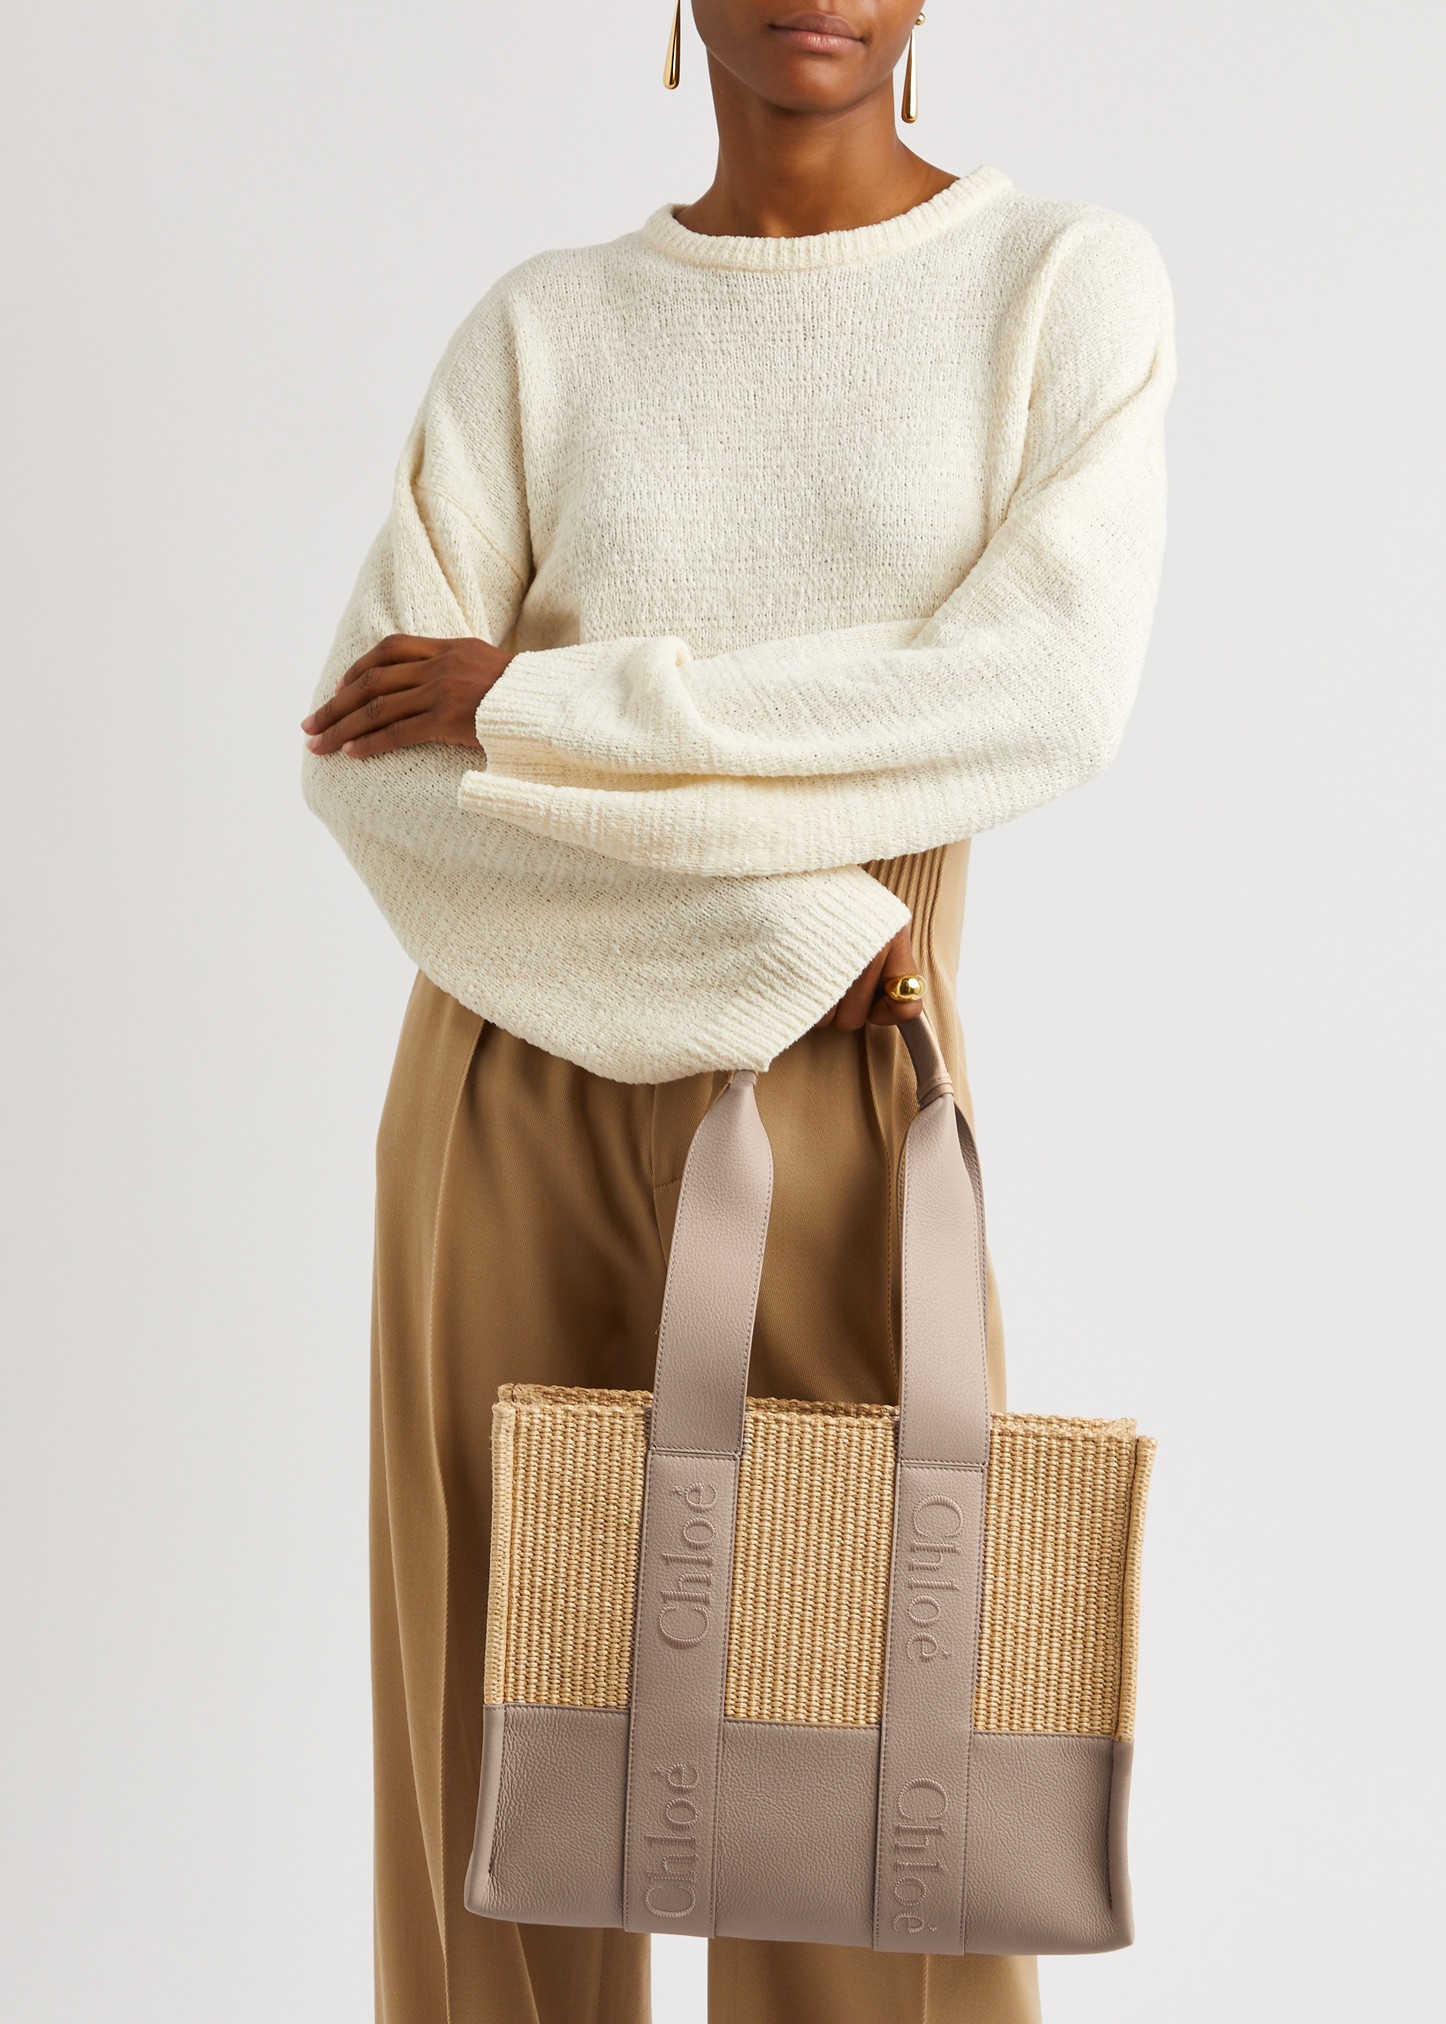 Woody leather and raffia tote - 5